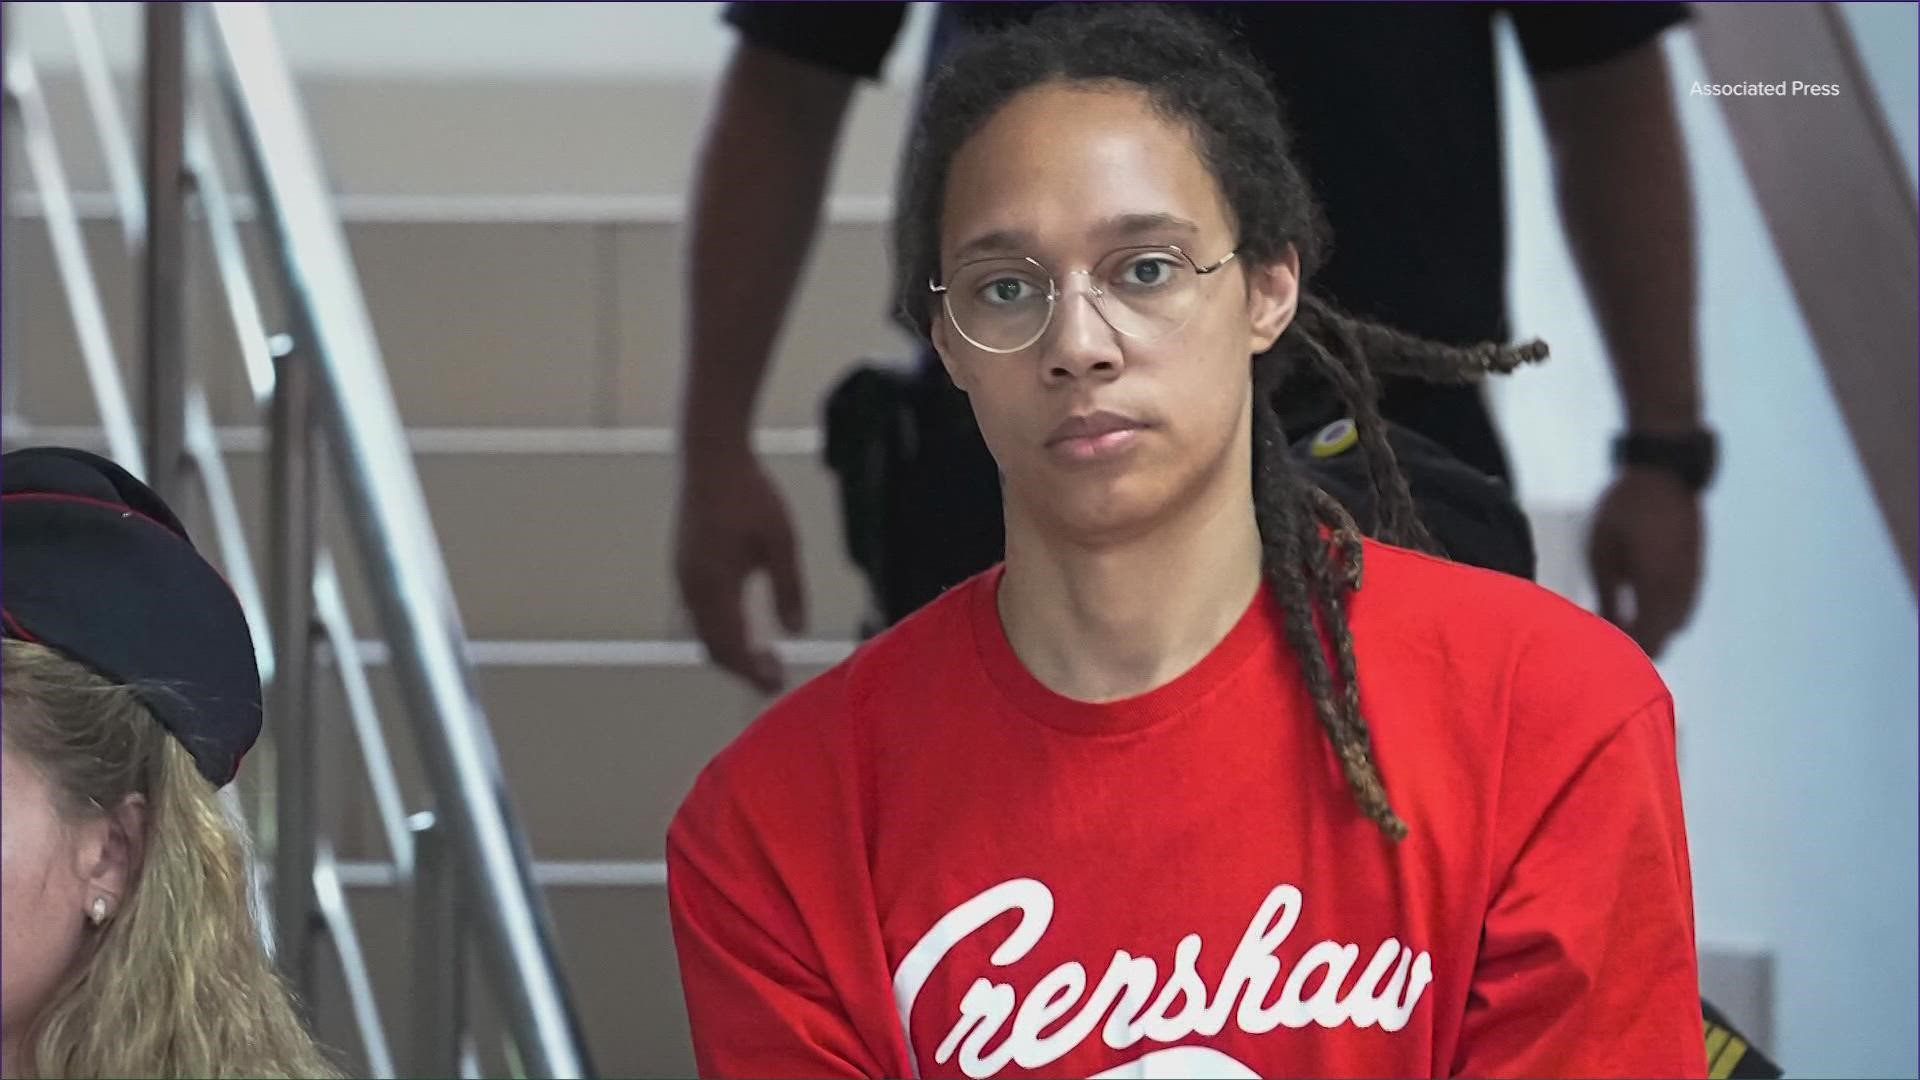 The White House said Griner's guilty plea won't impact negotiations to free her from Russian custody.